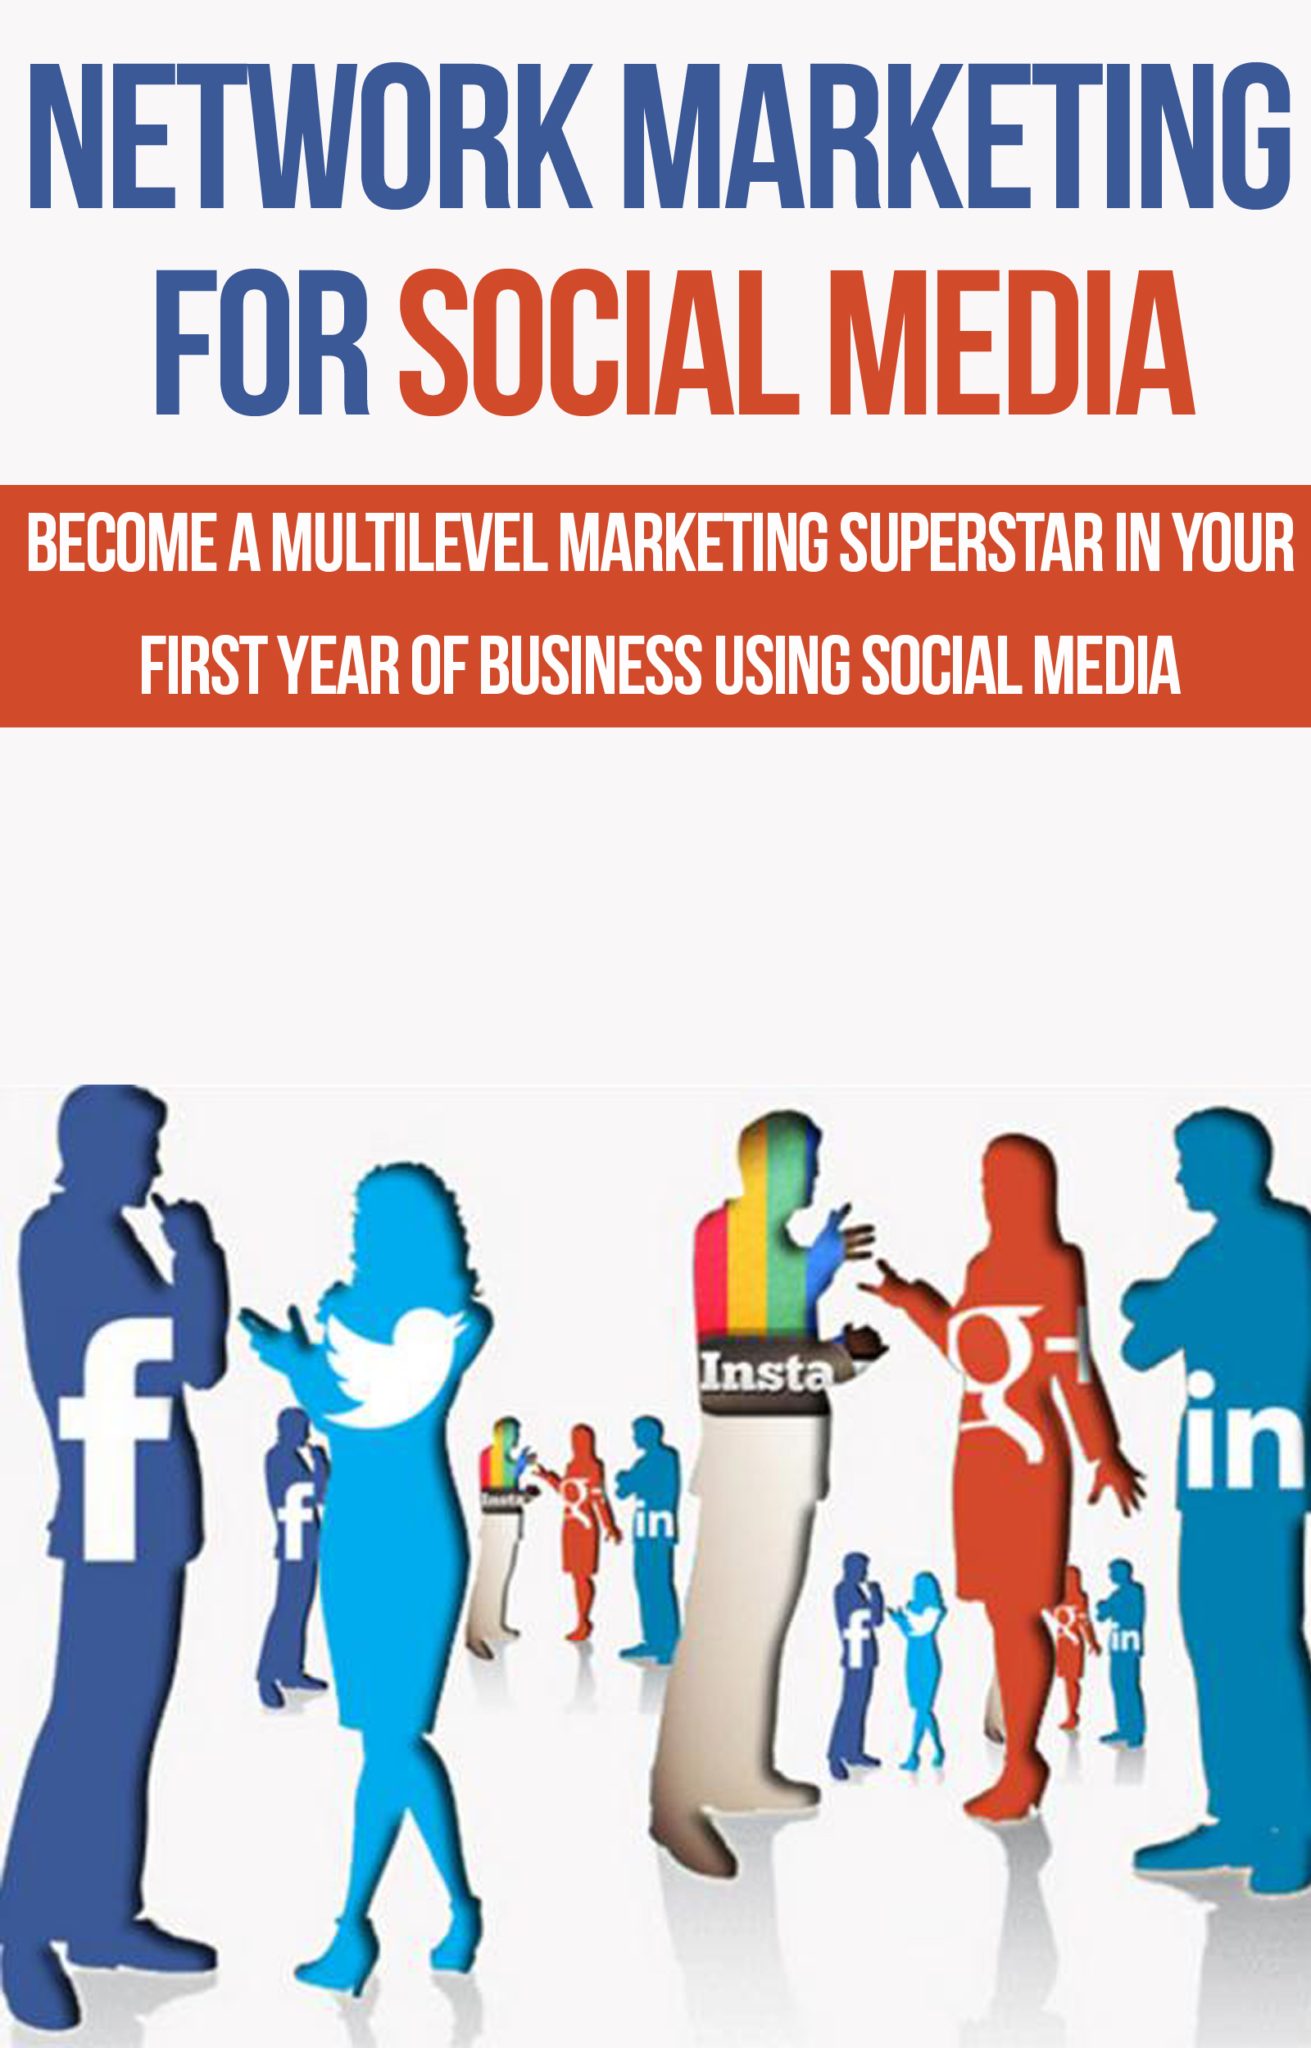 FREE: Network Marketing: Direct Sales: Network Marketing for Social Media: Become a MLM Superstar in Your First Year of Business Using Social Media by Brent R